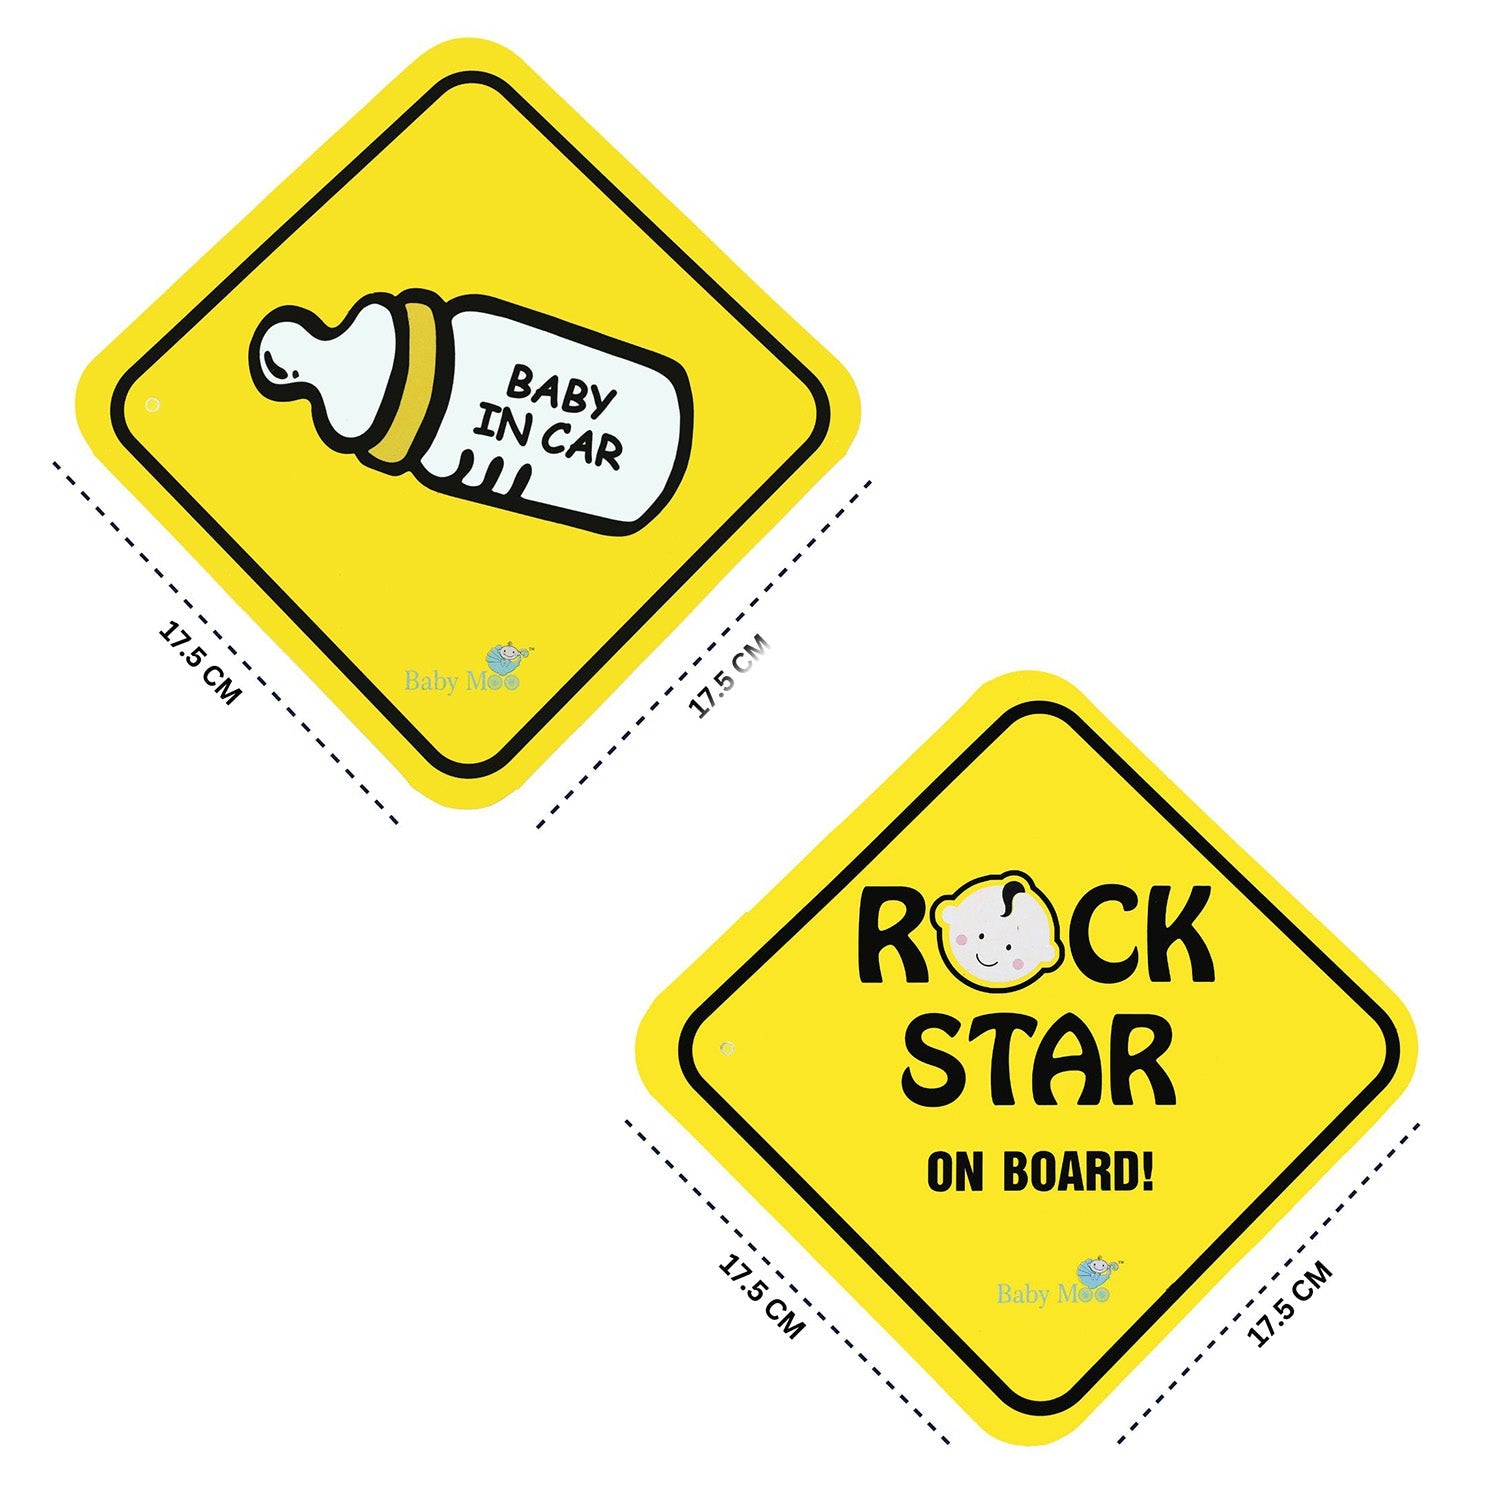 Baby Moo Car Safety Sign Rockstar Baby On Board With Suction Cup Clip 2 Pack - Yellow